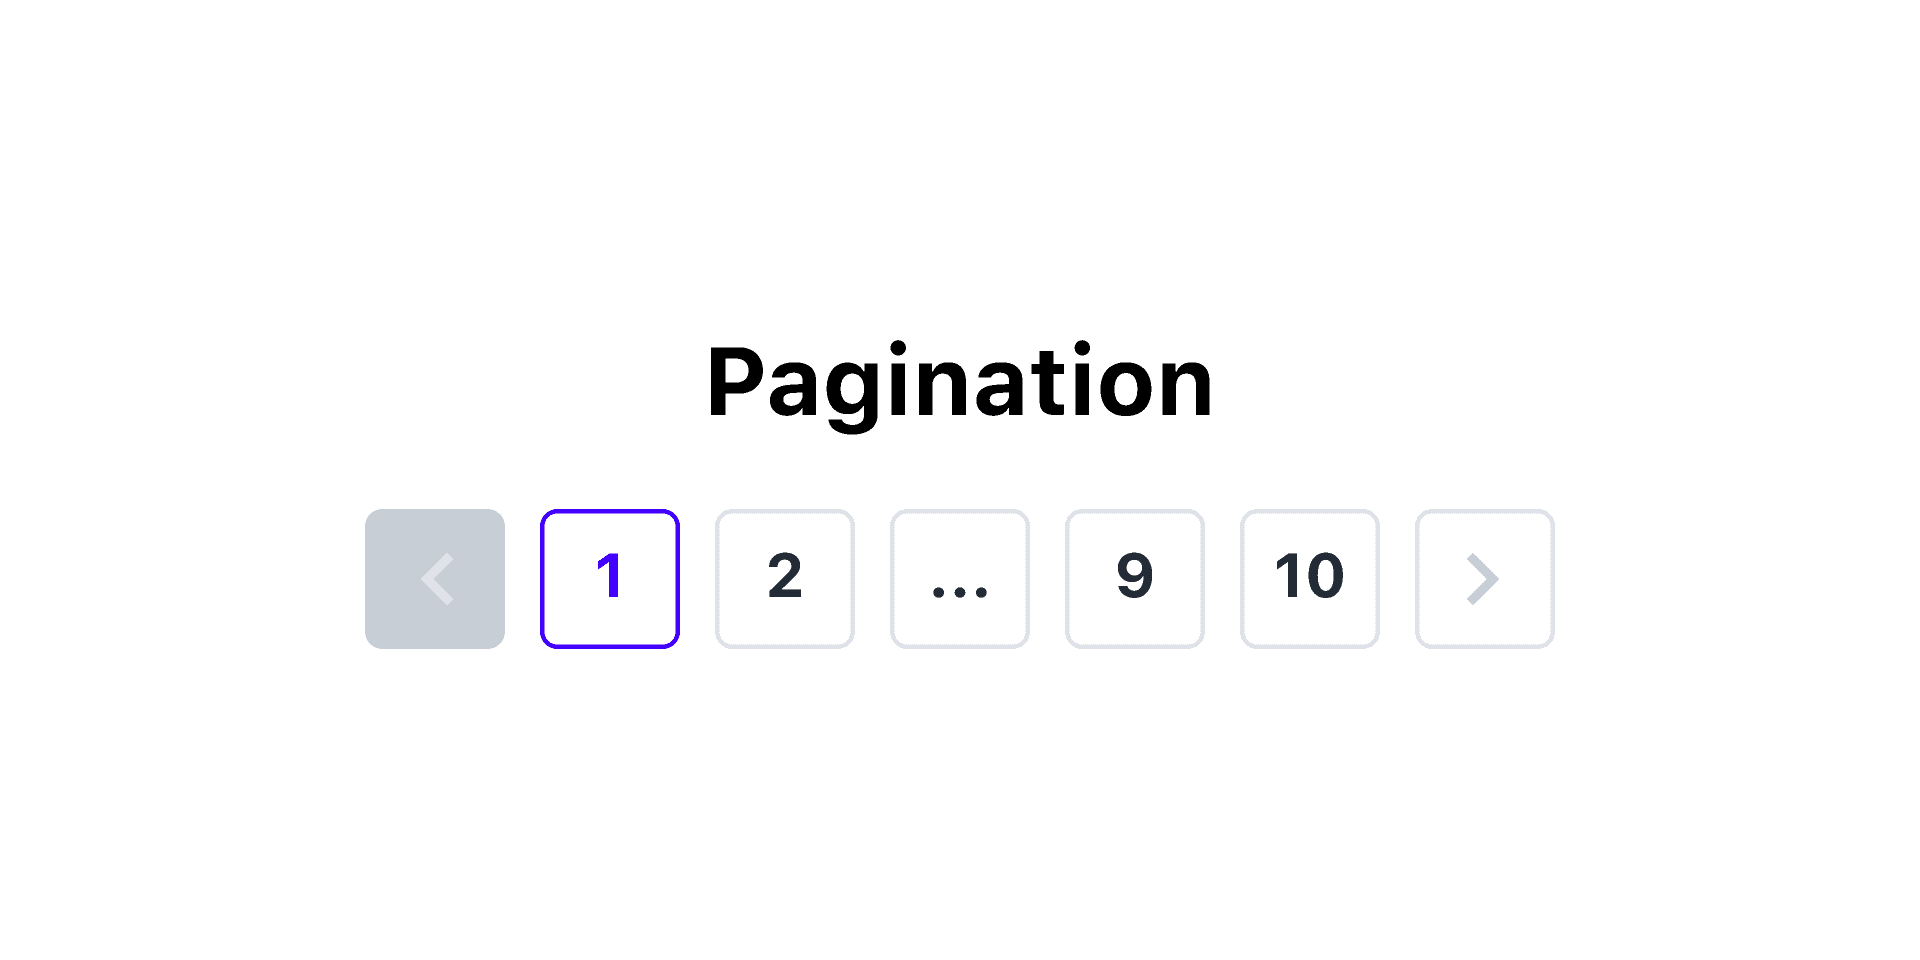 example of pagination controls in a UI